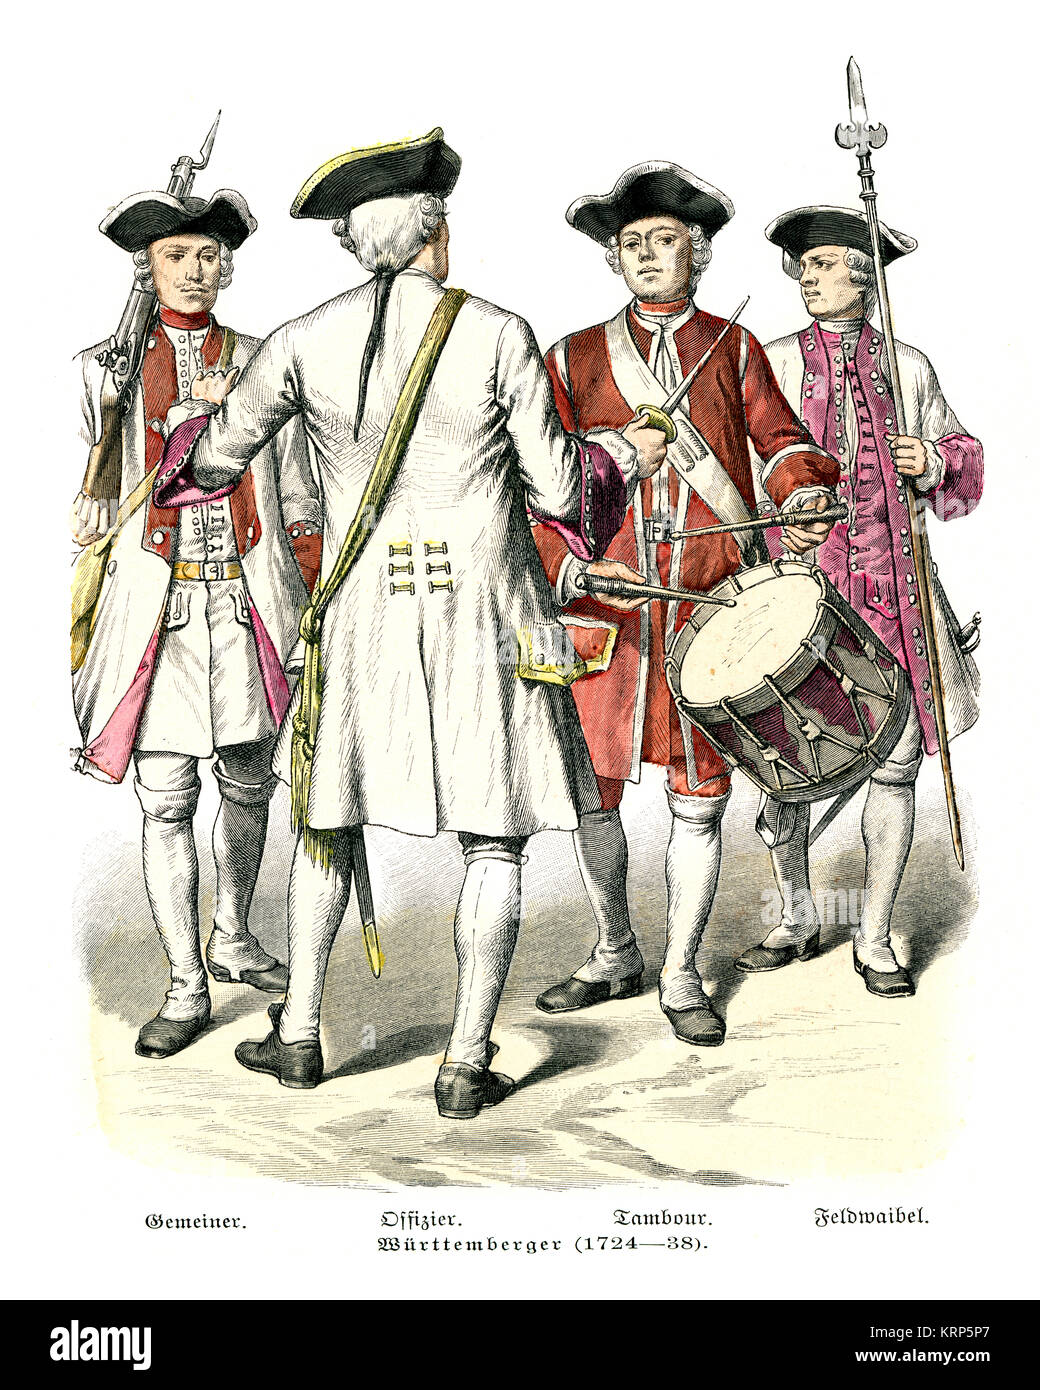 Vintage engraving of Miltary Uniforms 18th Century Wurttemberg, Private, Officer, Drummer, Sergeant. 1724 - 38 Stock Photo